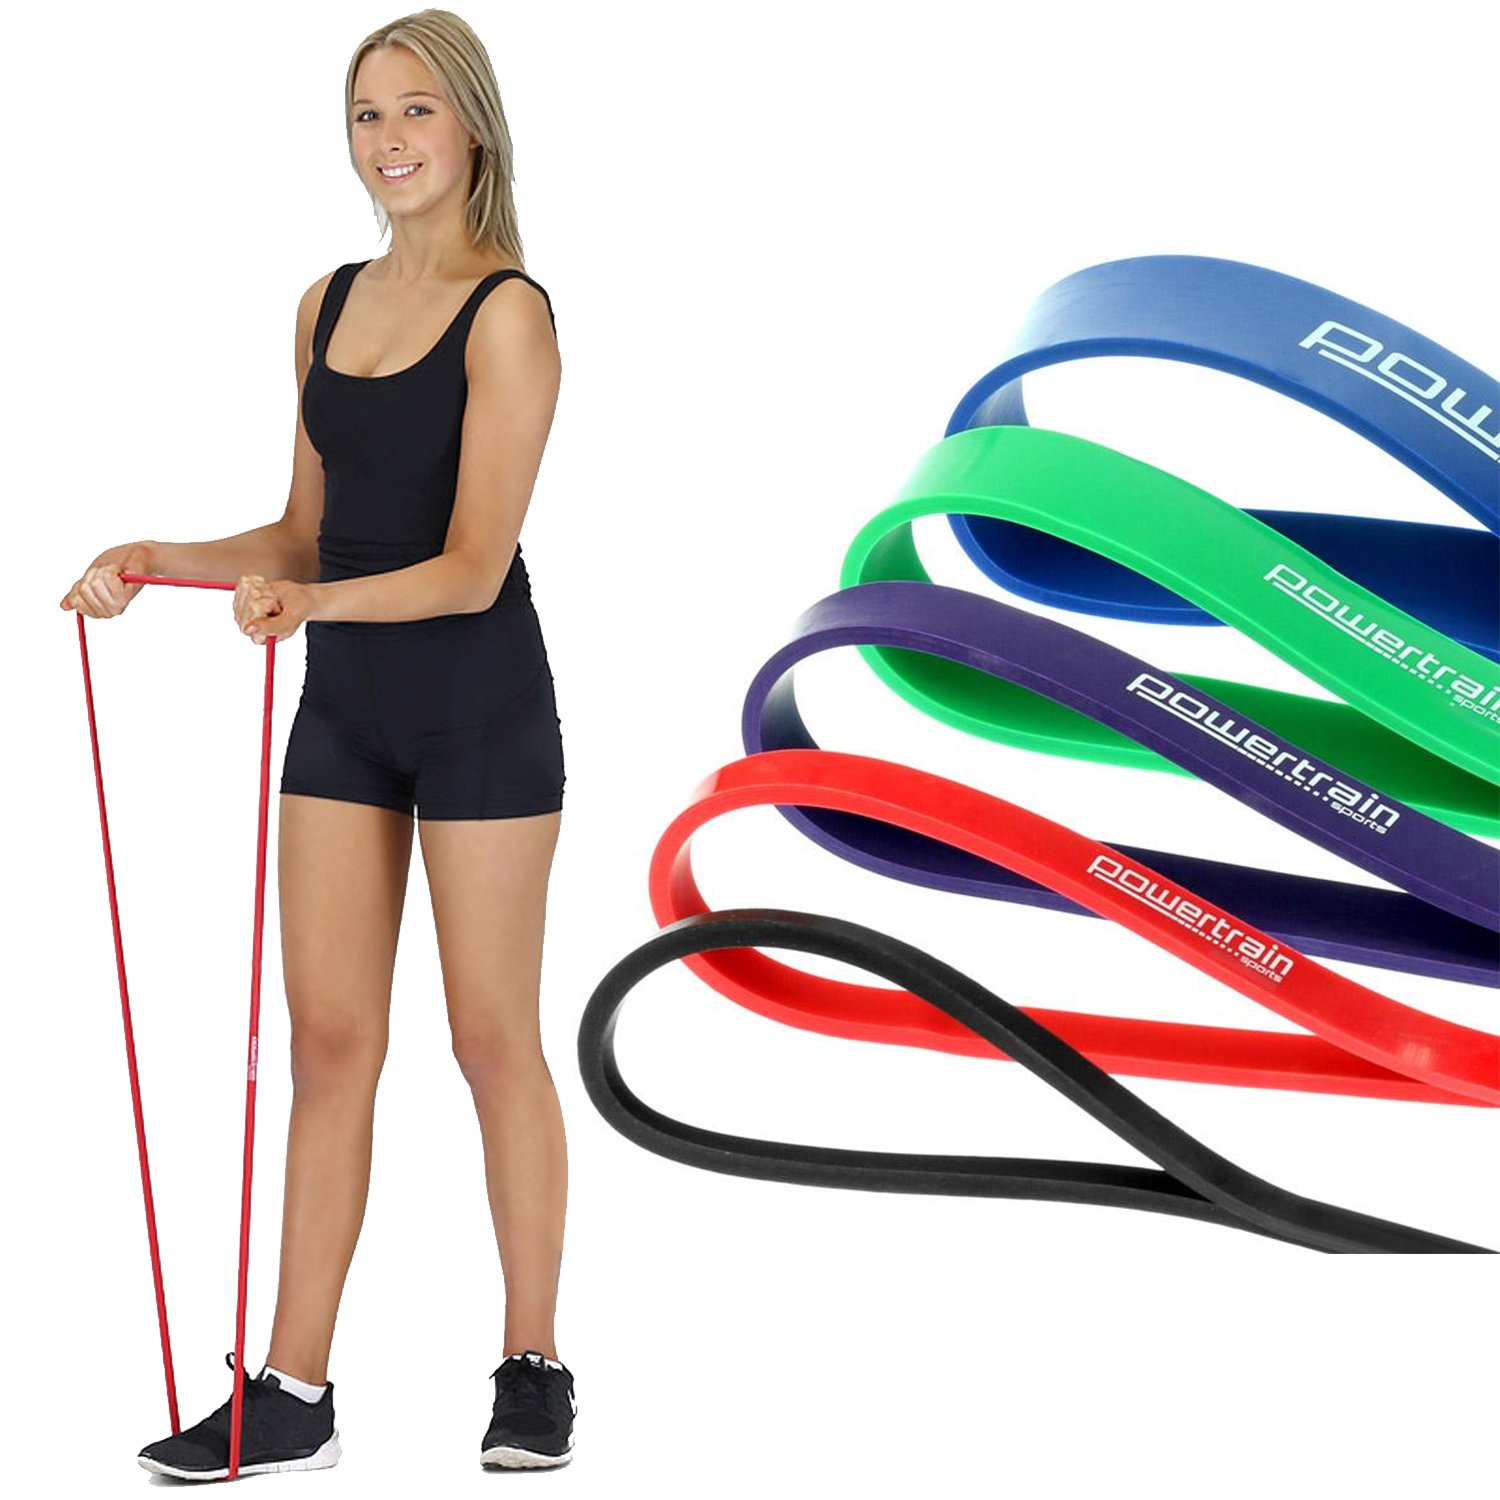 5x Powertrain Home Workout Resistance Bands Gym Exercise 1